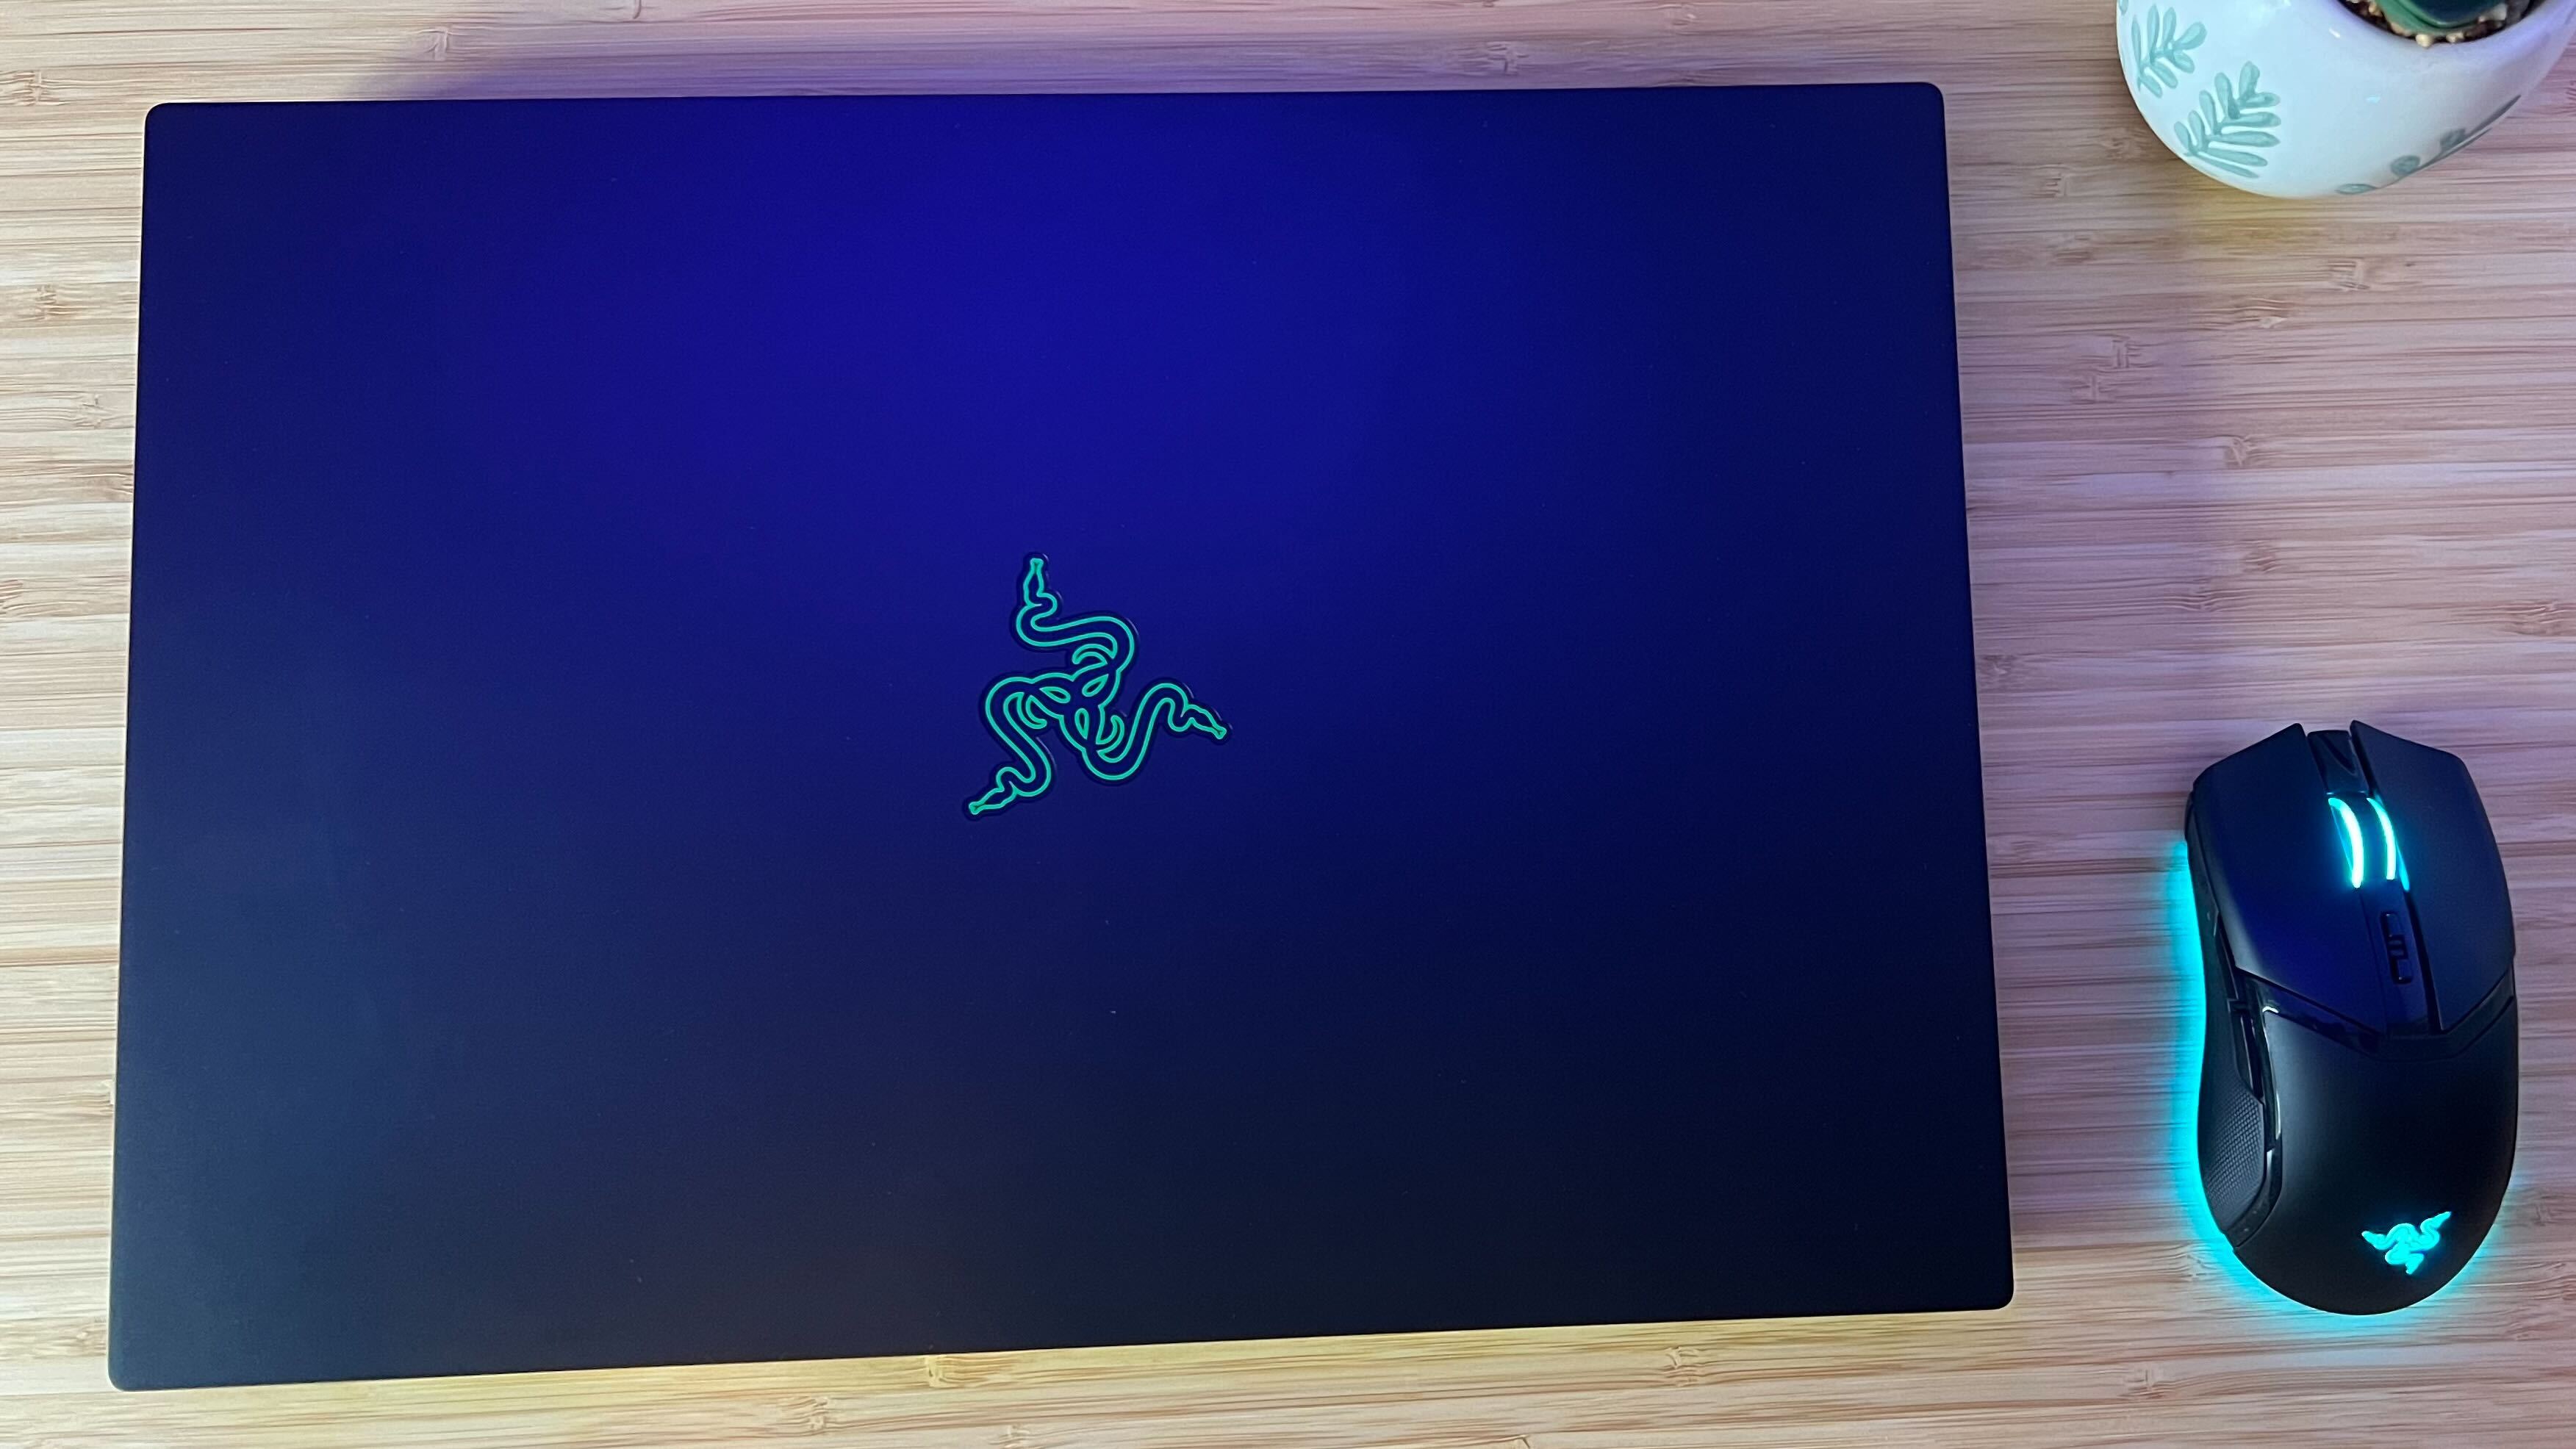 Razer Blade 16 lid closed on a wooden table